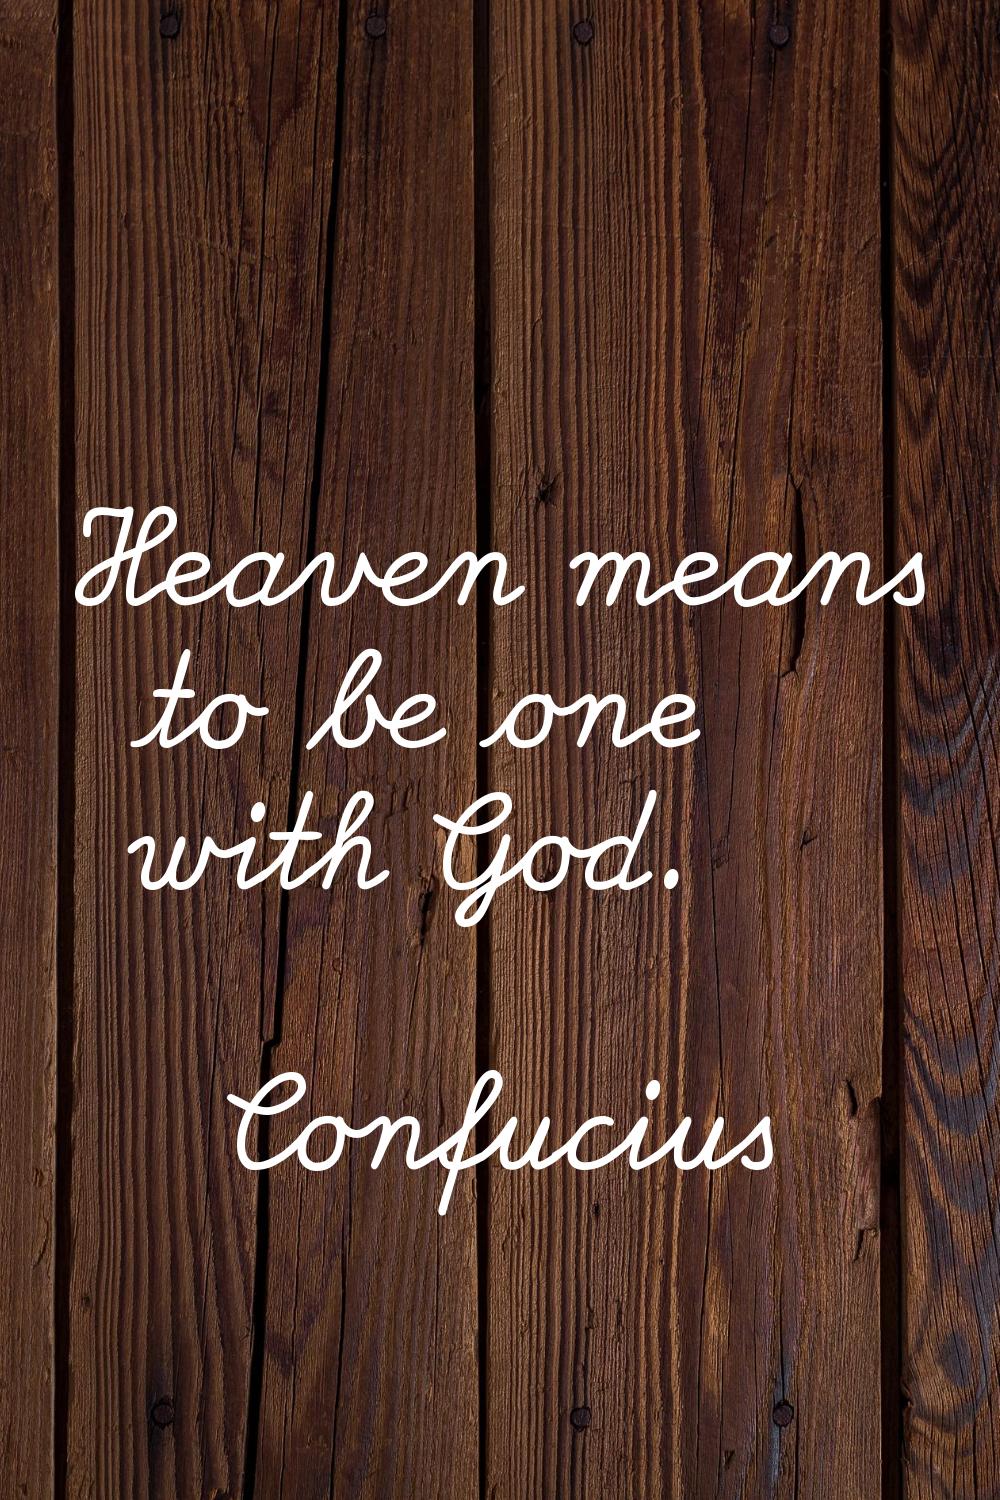 Heaven means to be one with God.